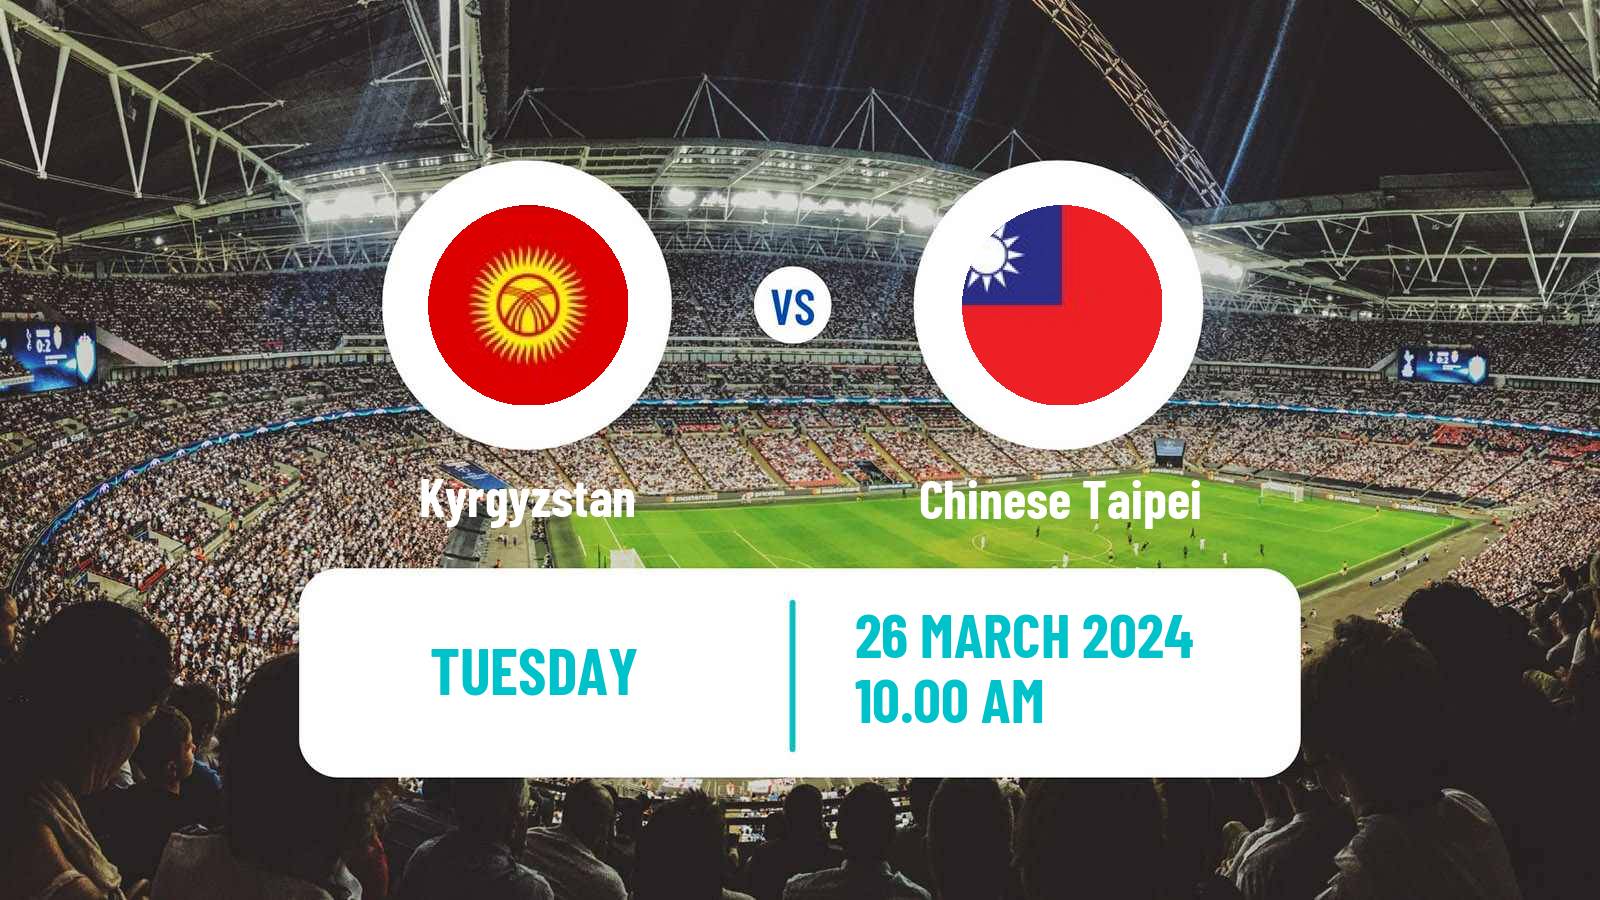 Soccer FIFA World Cup Kyrgyzstan - Chinese Taipei